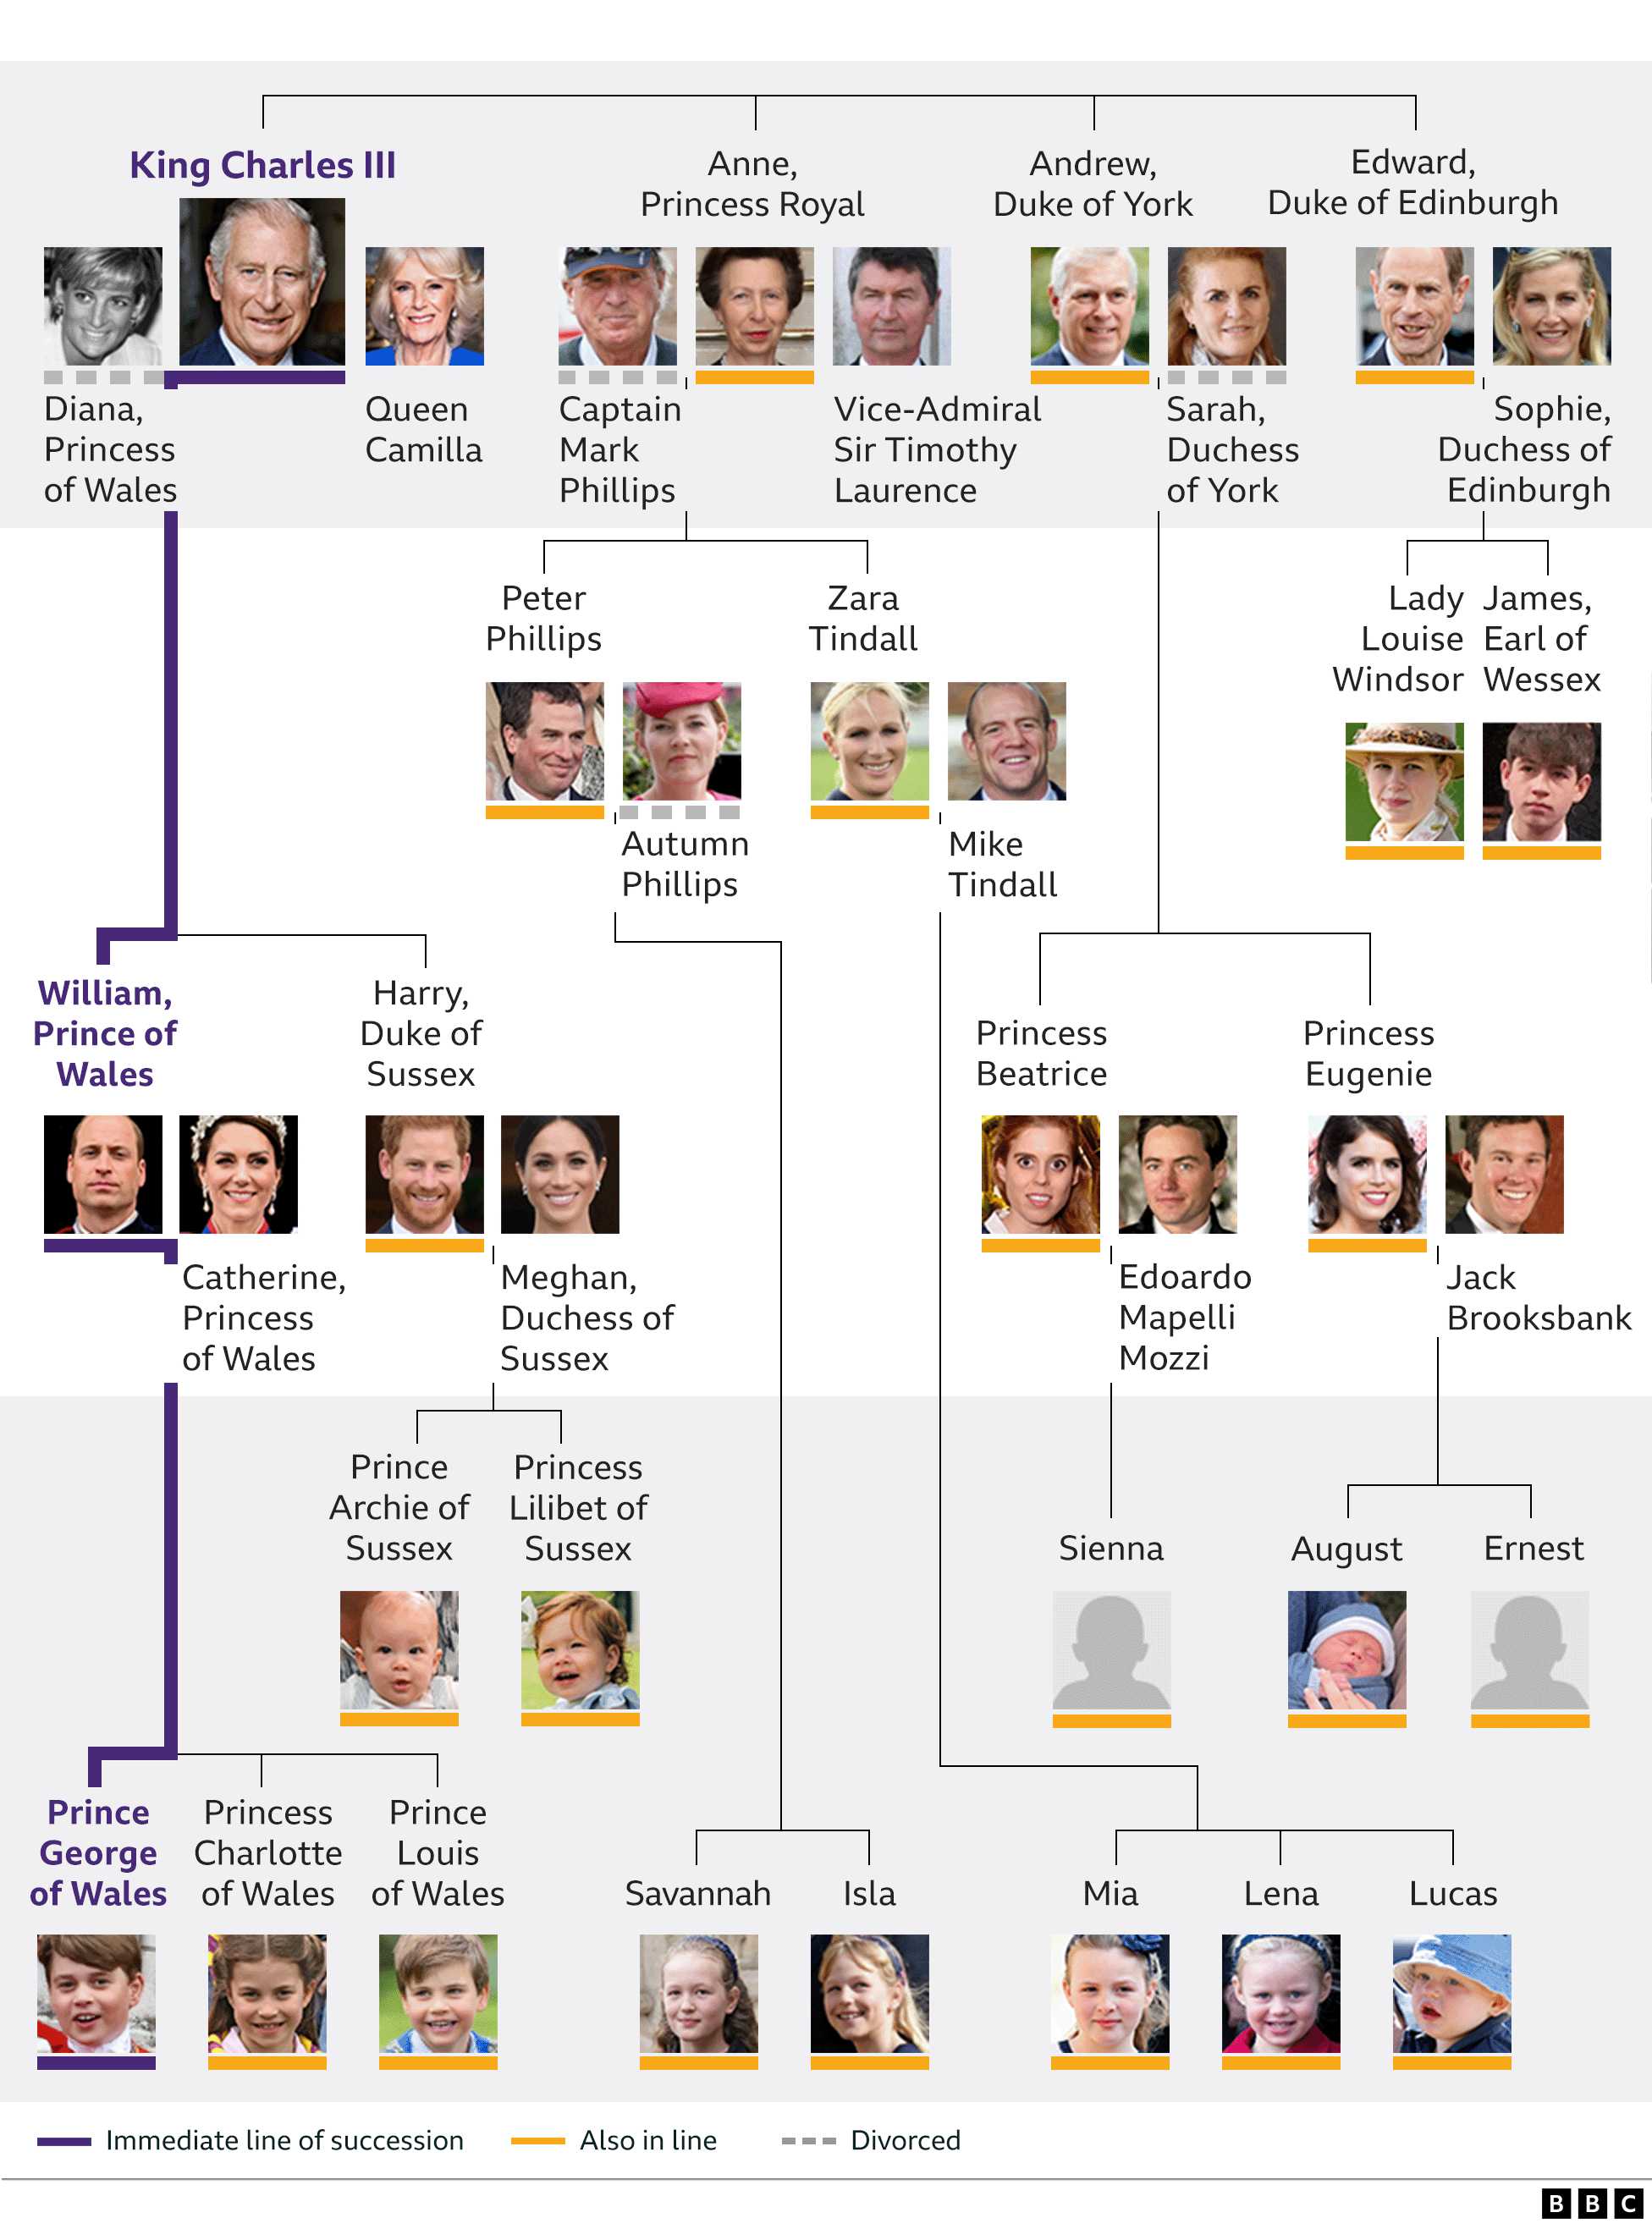 A family tree graphic showing Queen Elizabeth II’s children Charles, Anne, Andrew and Edward and their families. It also shows the line of succession from King Charles III to his son William and grandson George